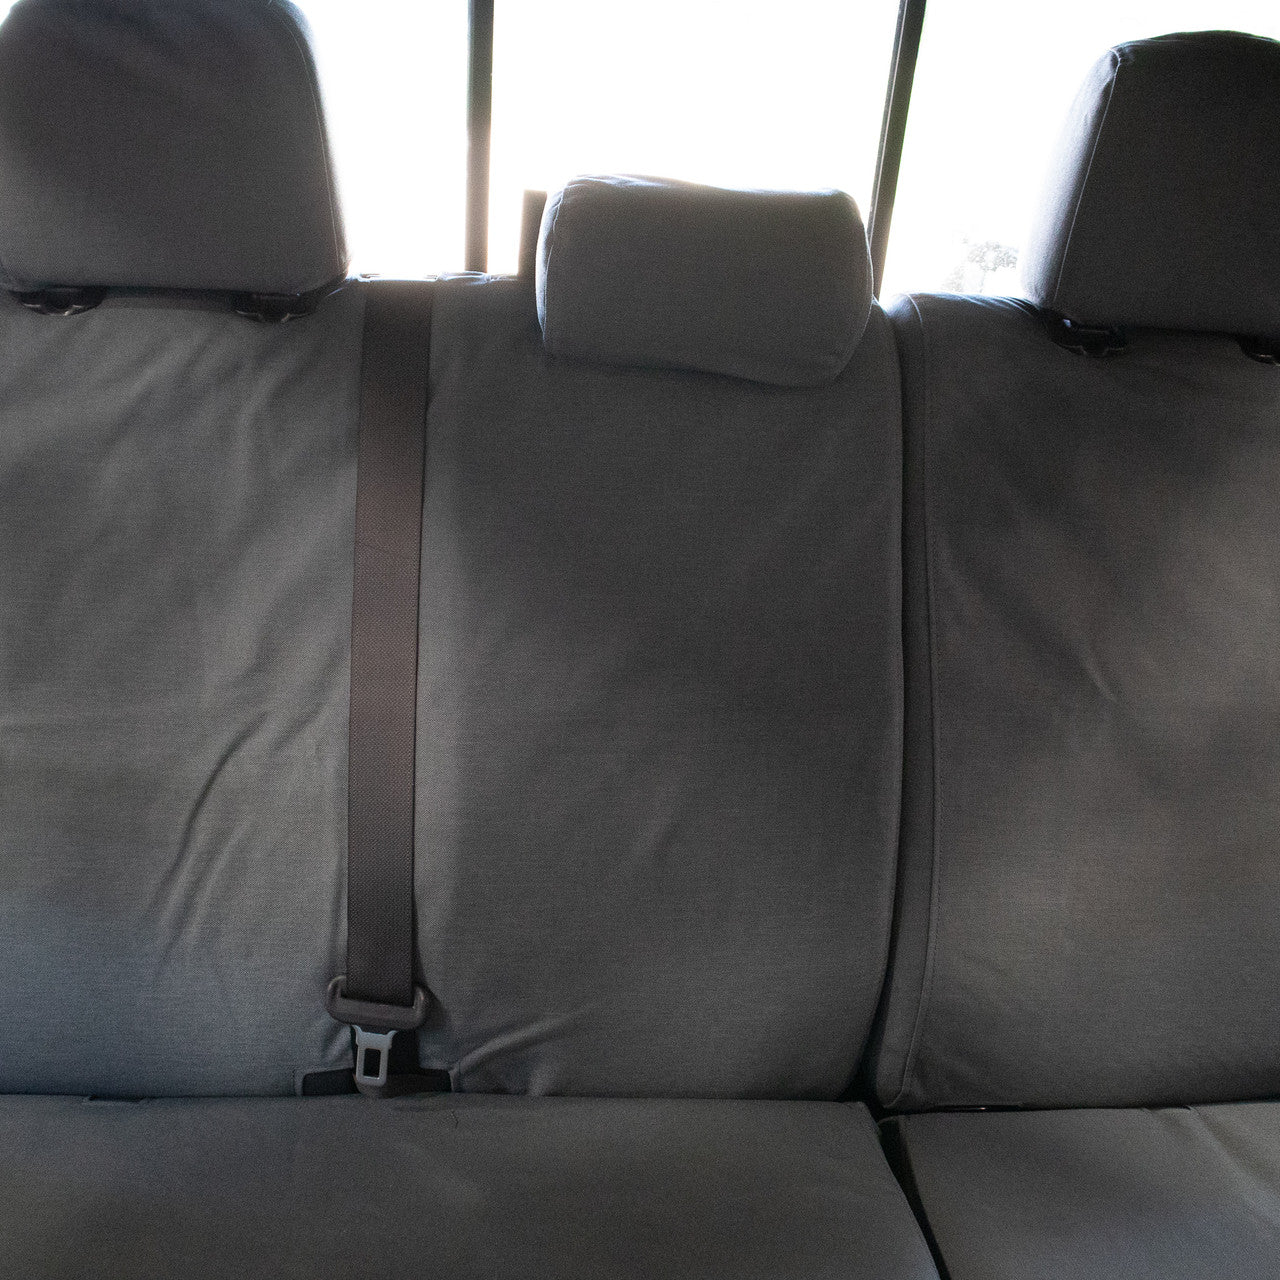 Rear Antimicrobial Seat Covers for Toyota Tacoma Trucks (ST175507)